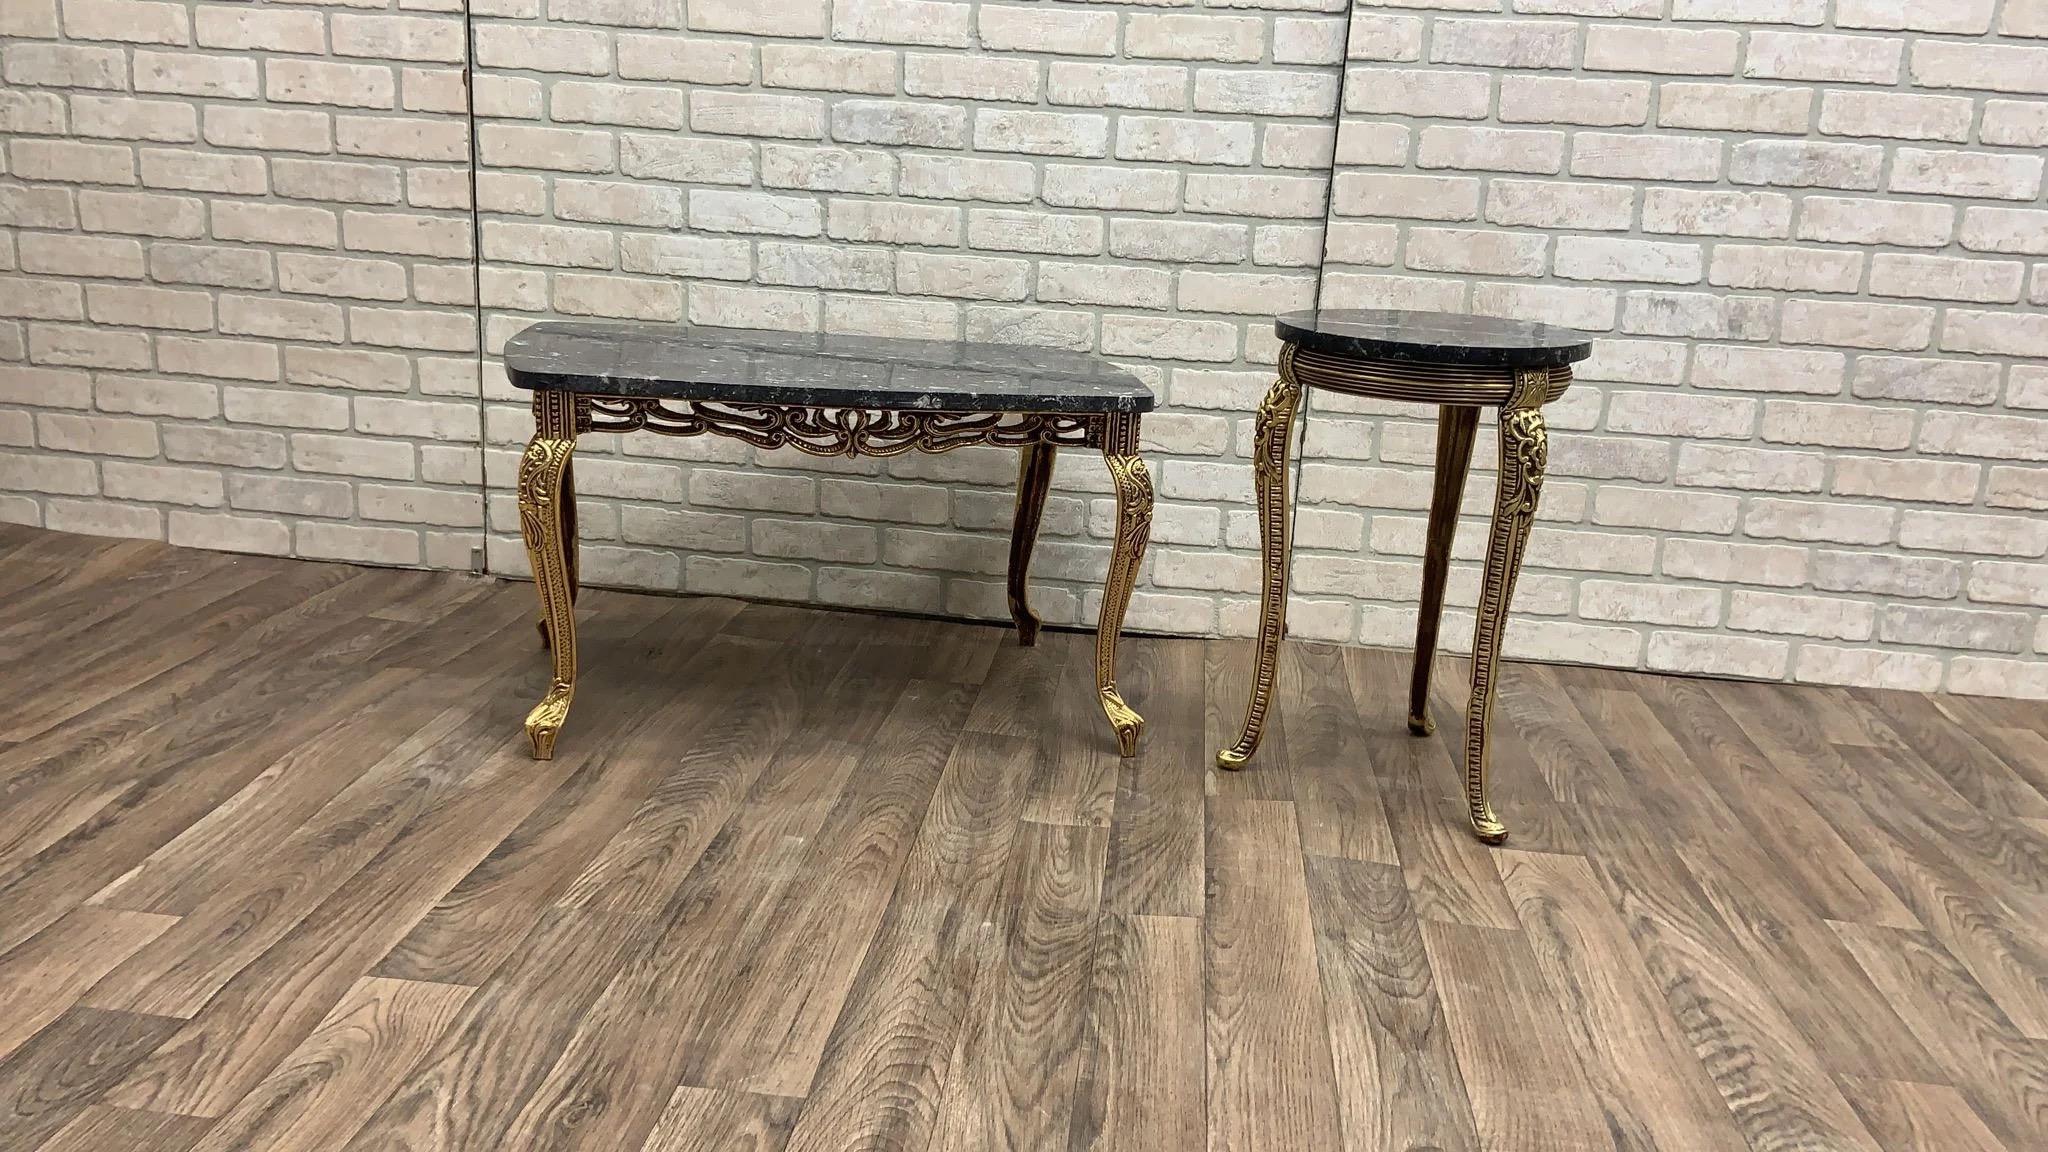 Vintage French Baroque Style Ornate Gilt-Bronze Base Marble Top Coffee Table wit In Good Condition For Sale In Chicago, IL